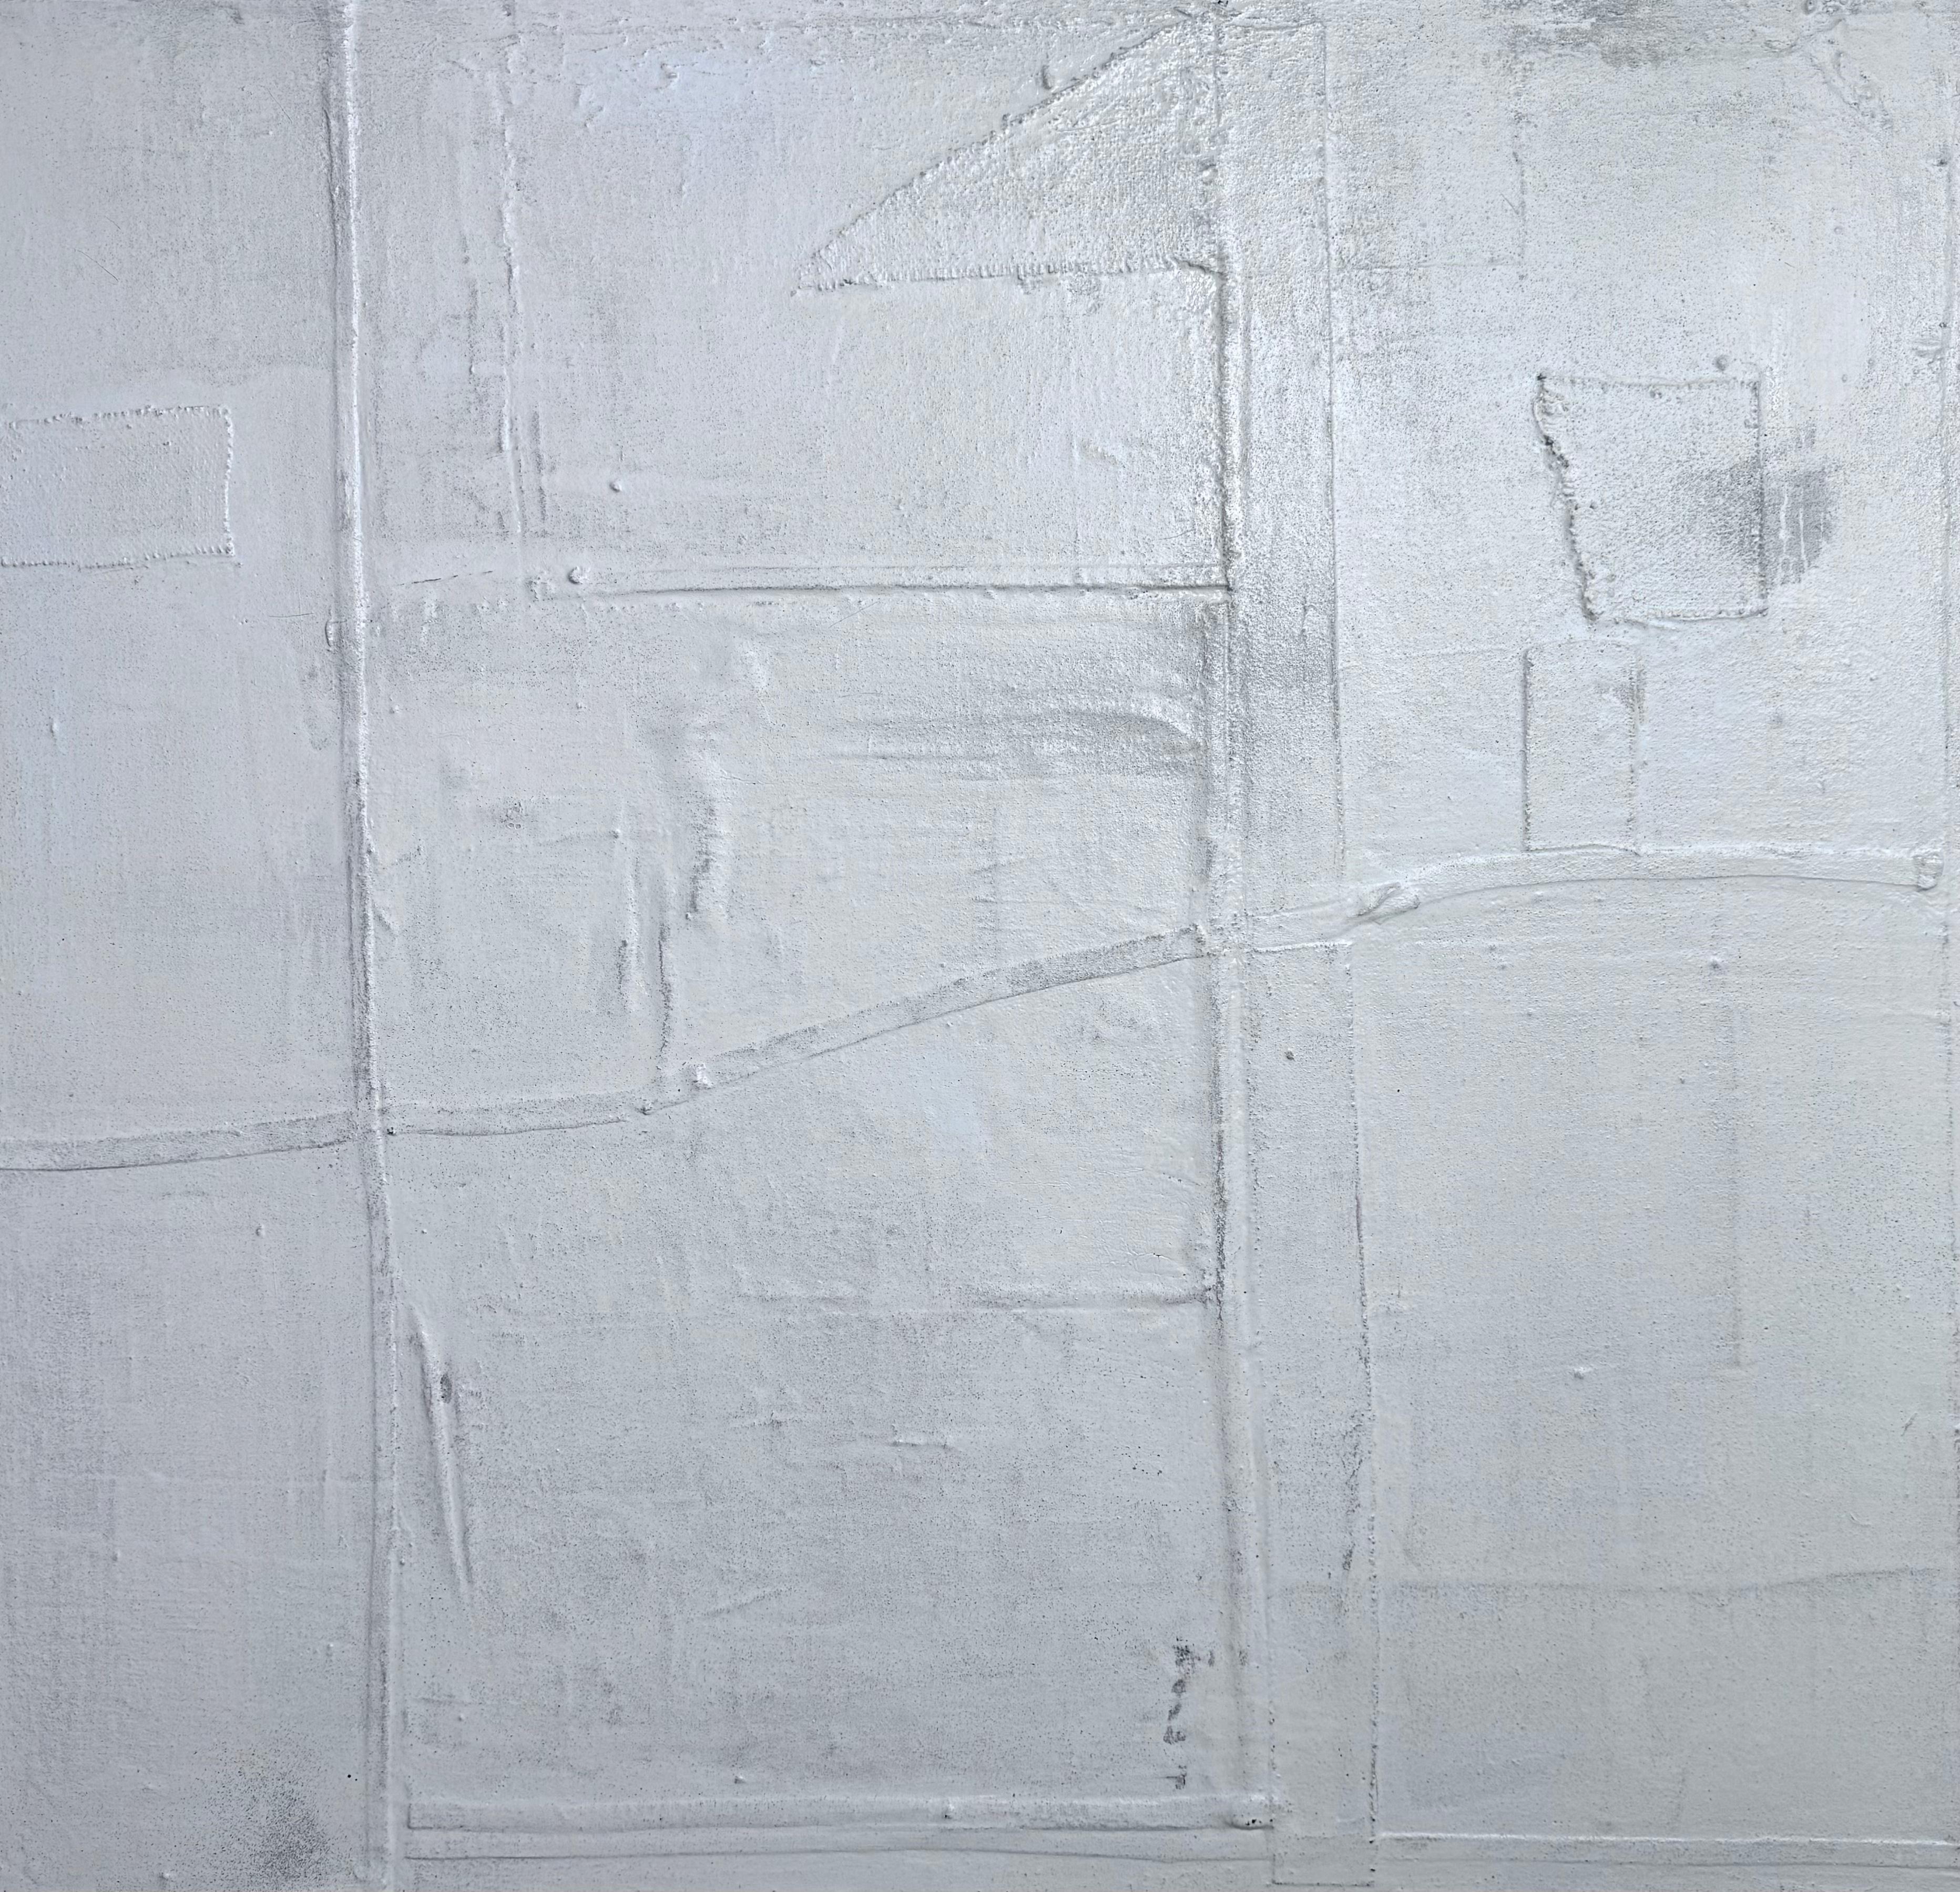 Listening to Trees II
Oil, bitumen, graphite, marble powder, burlap on canvas
44" X 42"

I am a visual artist whose work investigates small and large -scale abstraction primarily in the medium of painting employing the use of industrial